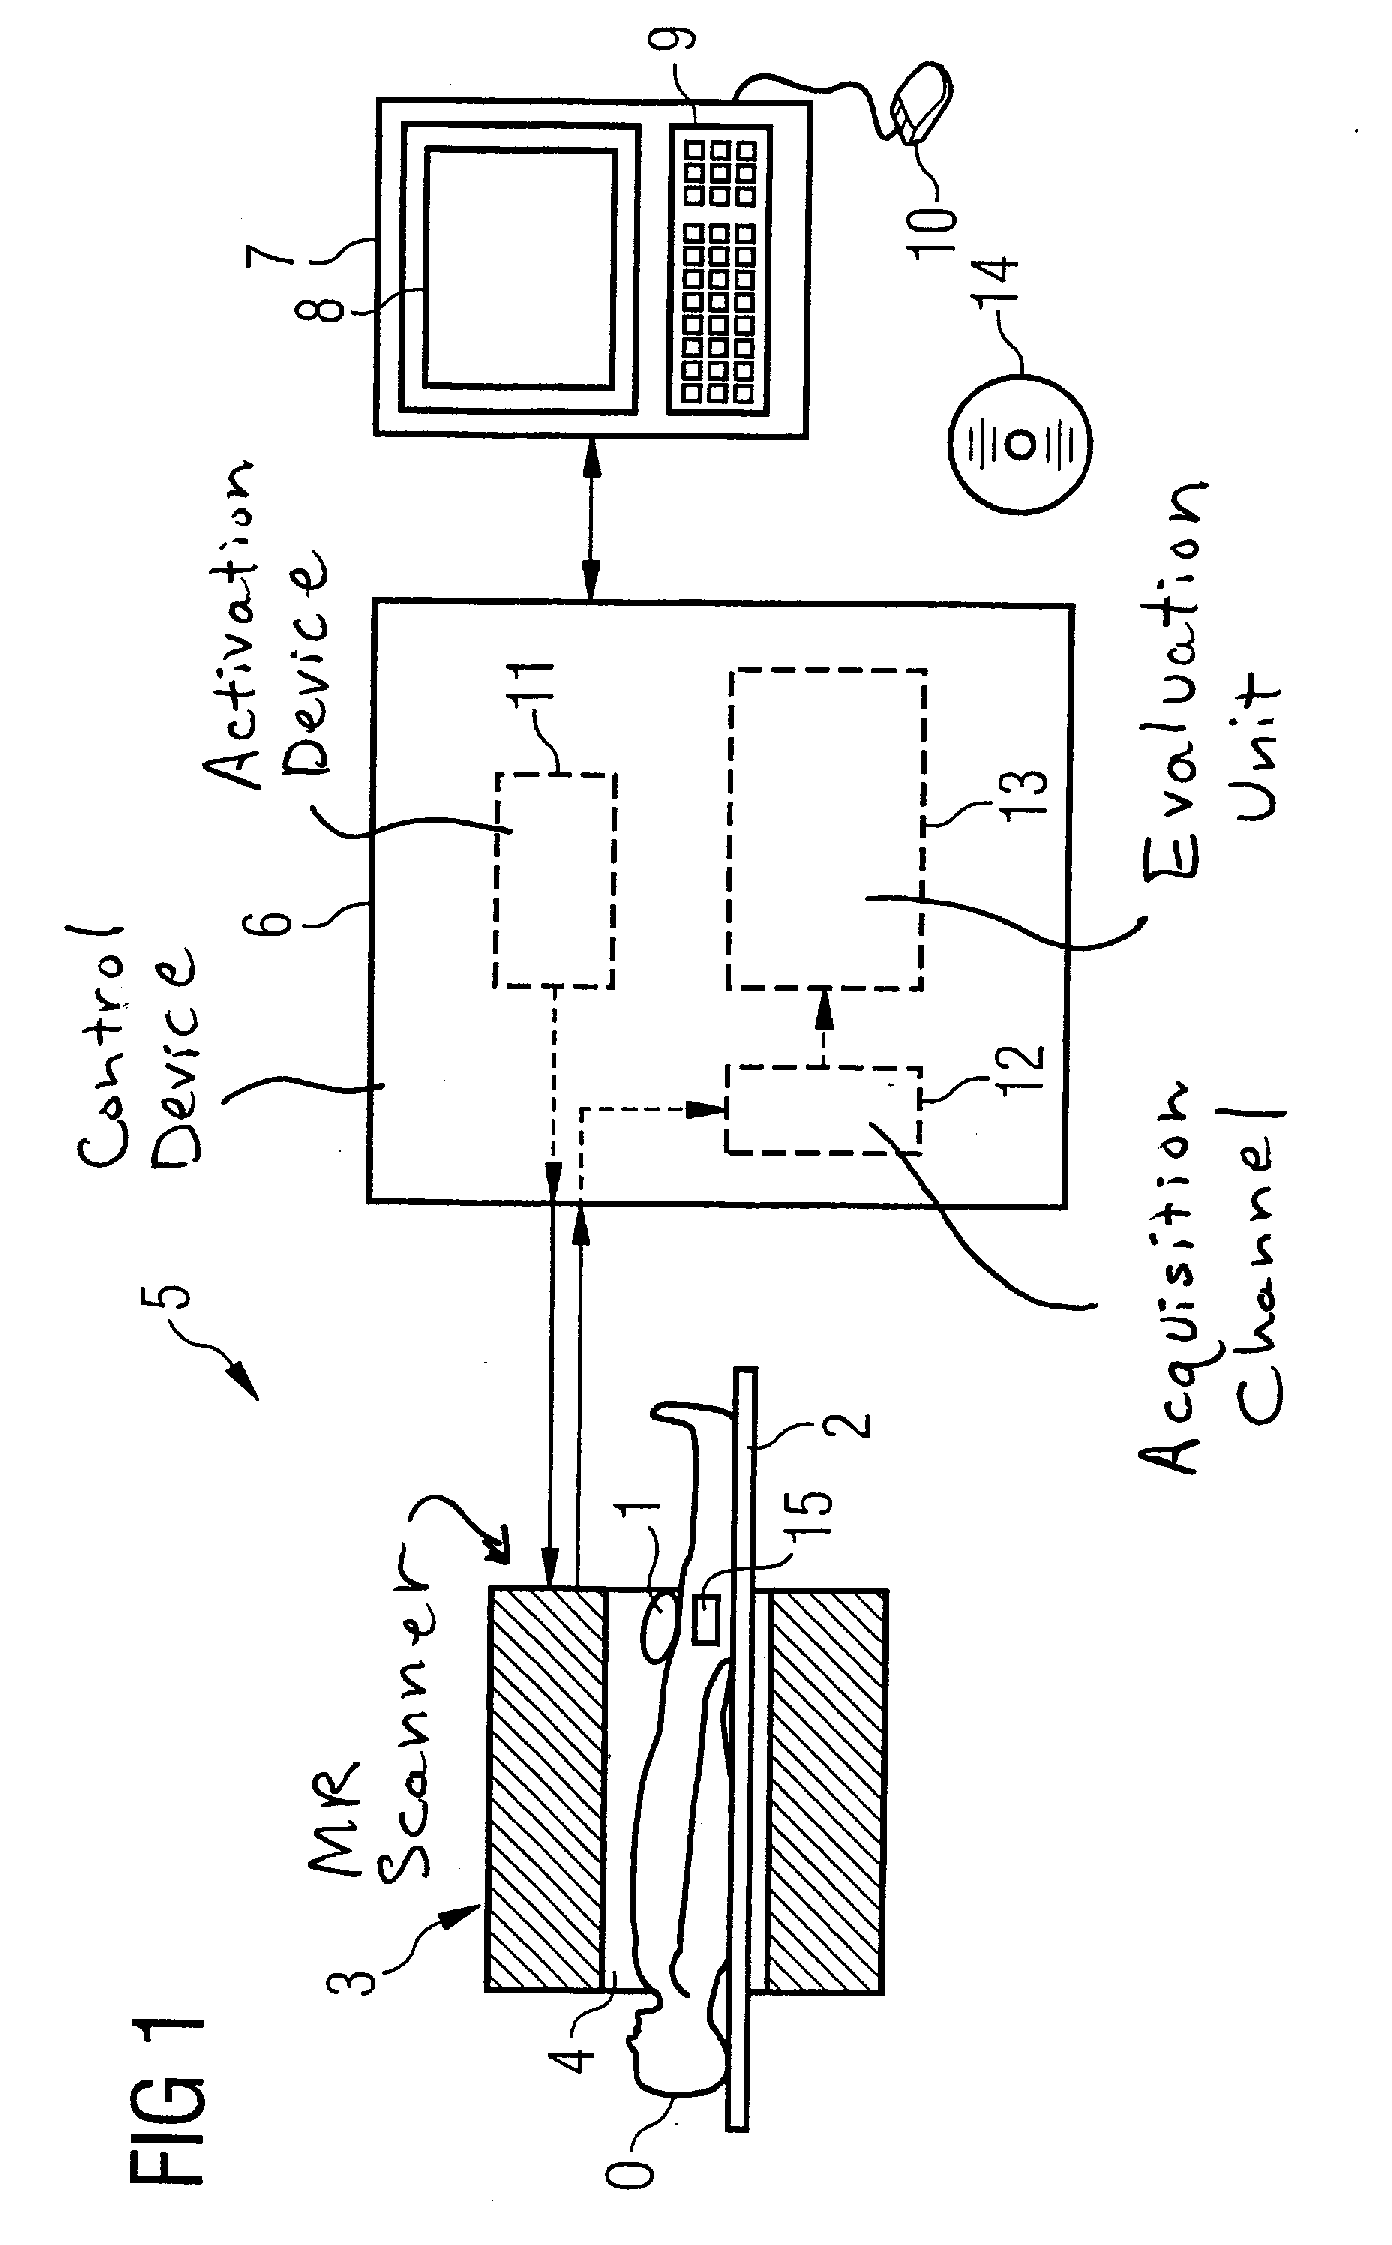 Magnetic resonance device and method for perfusion determination